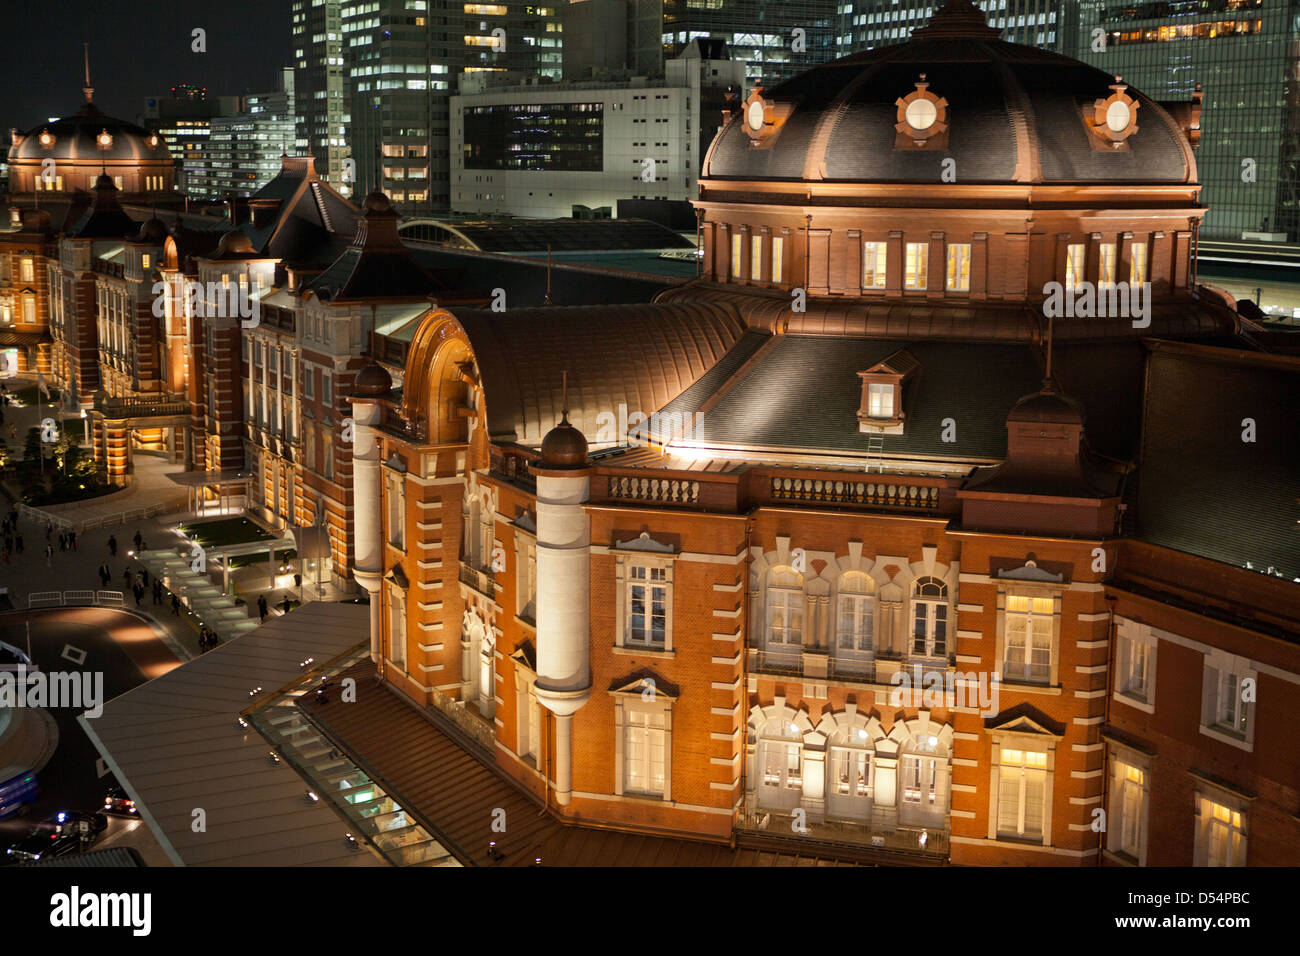 Tokyo Station opened in 1914.  Damaged extensively during WWII, the station was restored to pre-war condition in 2012. Stock Photo